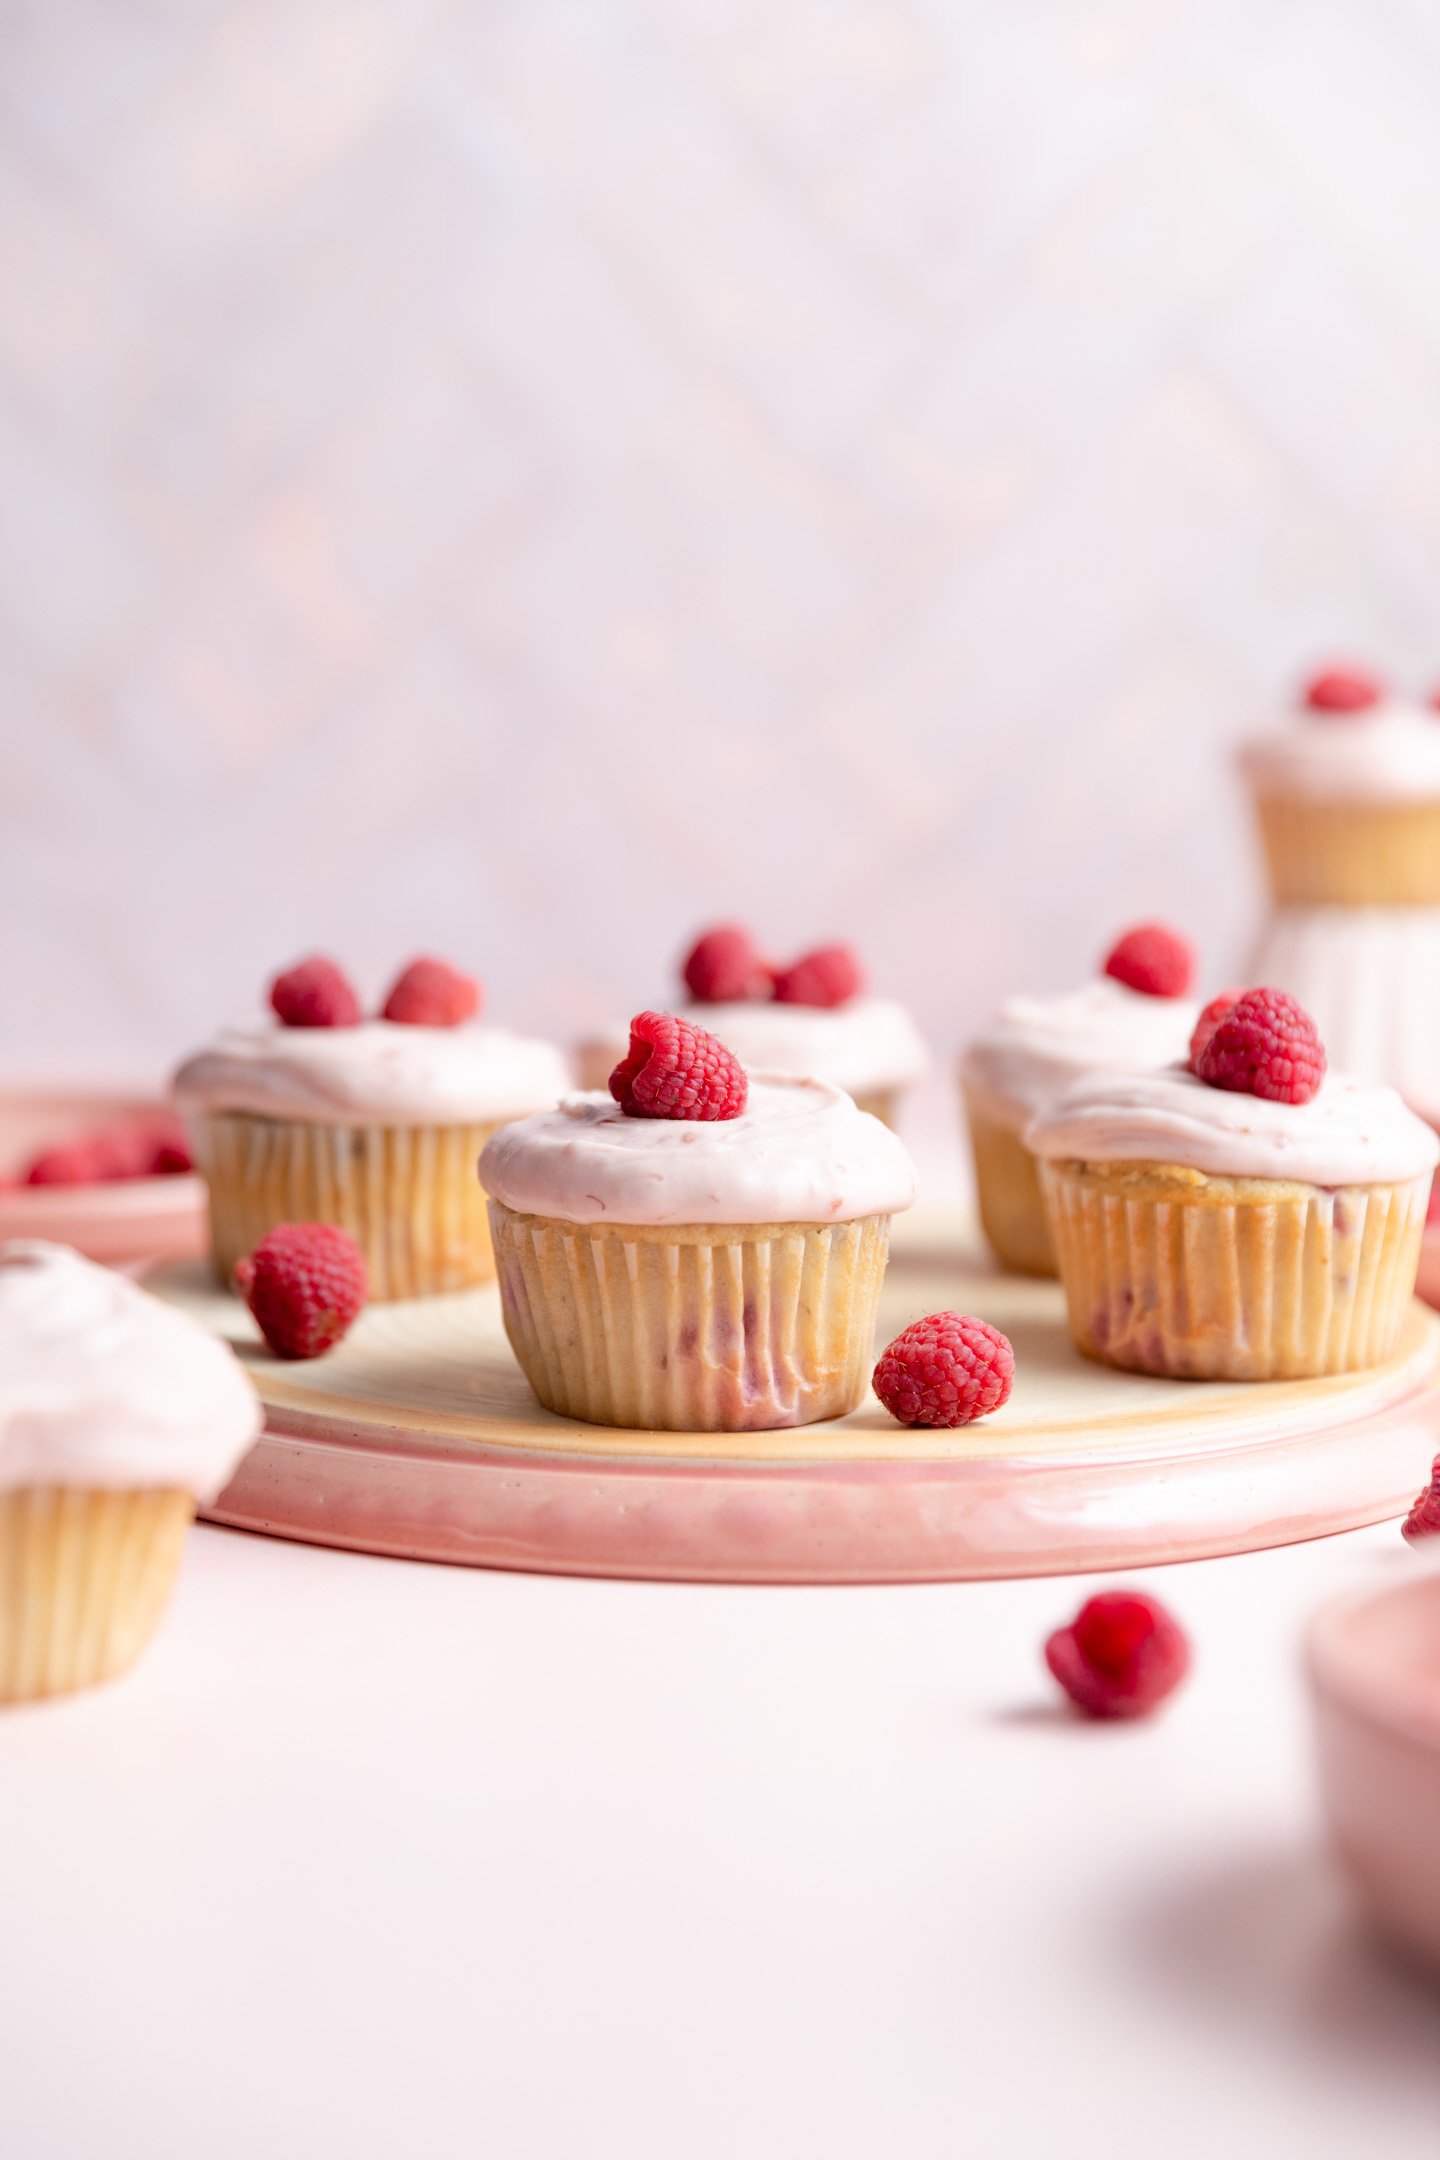 Raspberry cupcakes on an overturned pink plate.